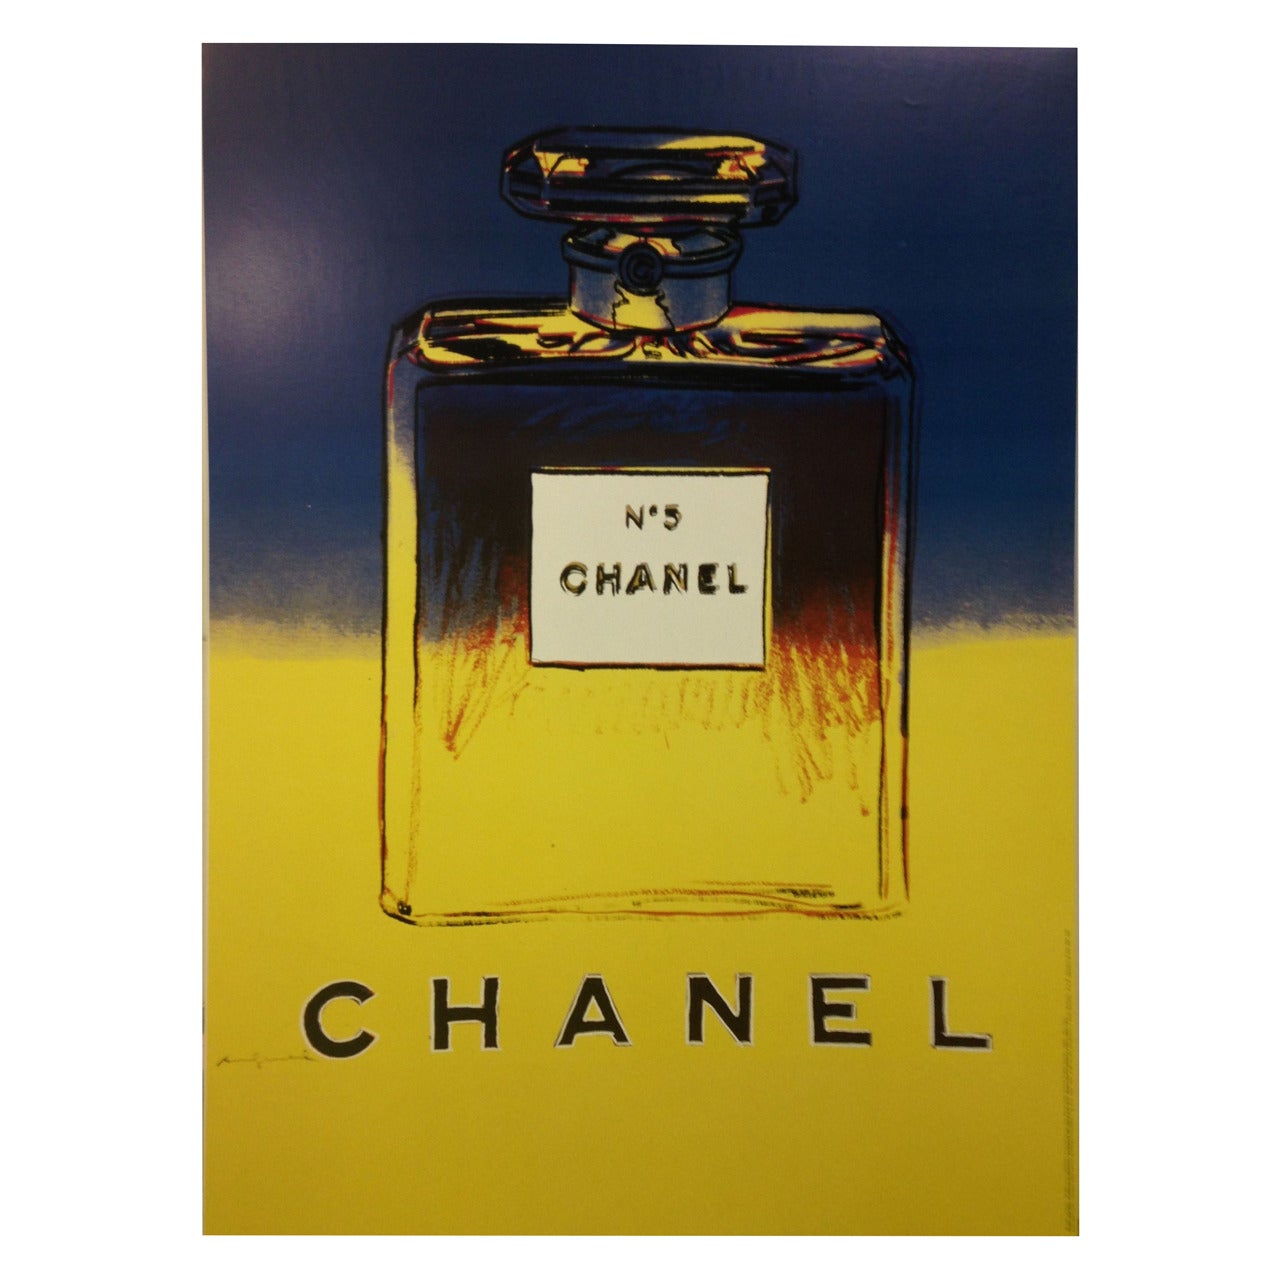 Andy Warhol, Original Chanel Campaign Poster, Paris, 1997 (Blue & Yellow)